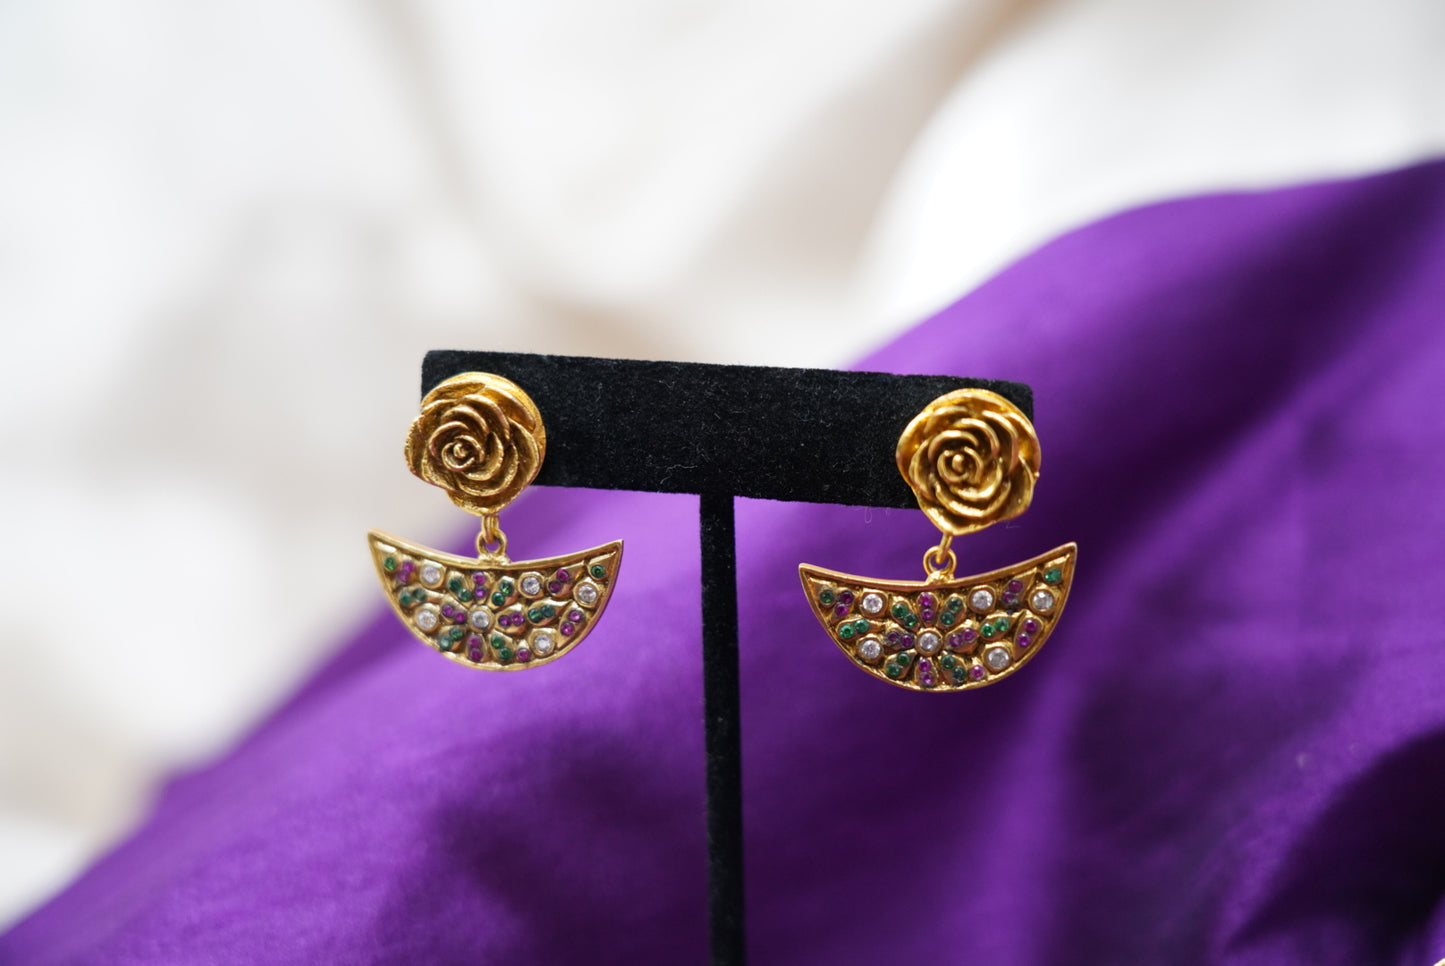 Solid Rose Design Chand Drop Earrings